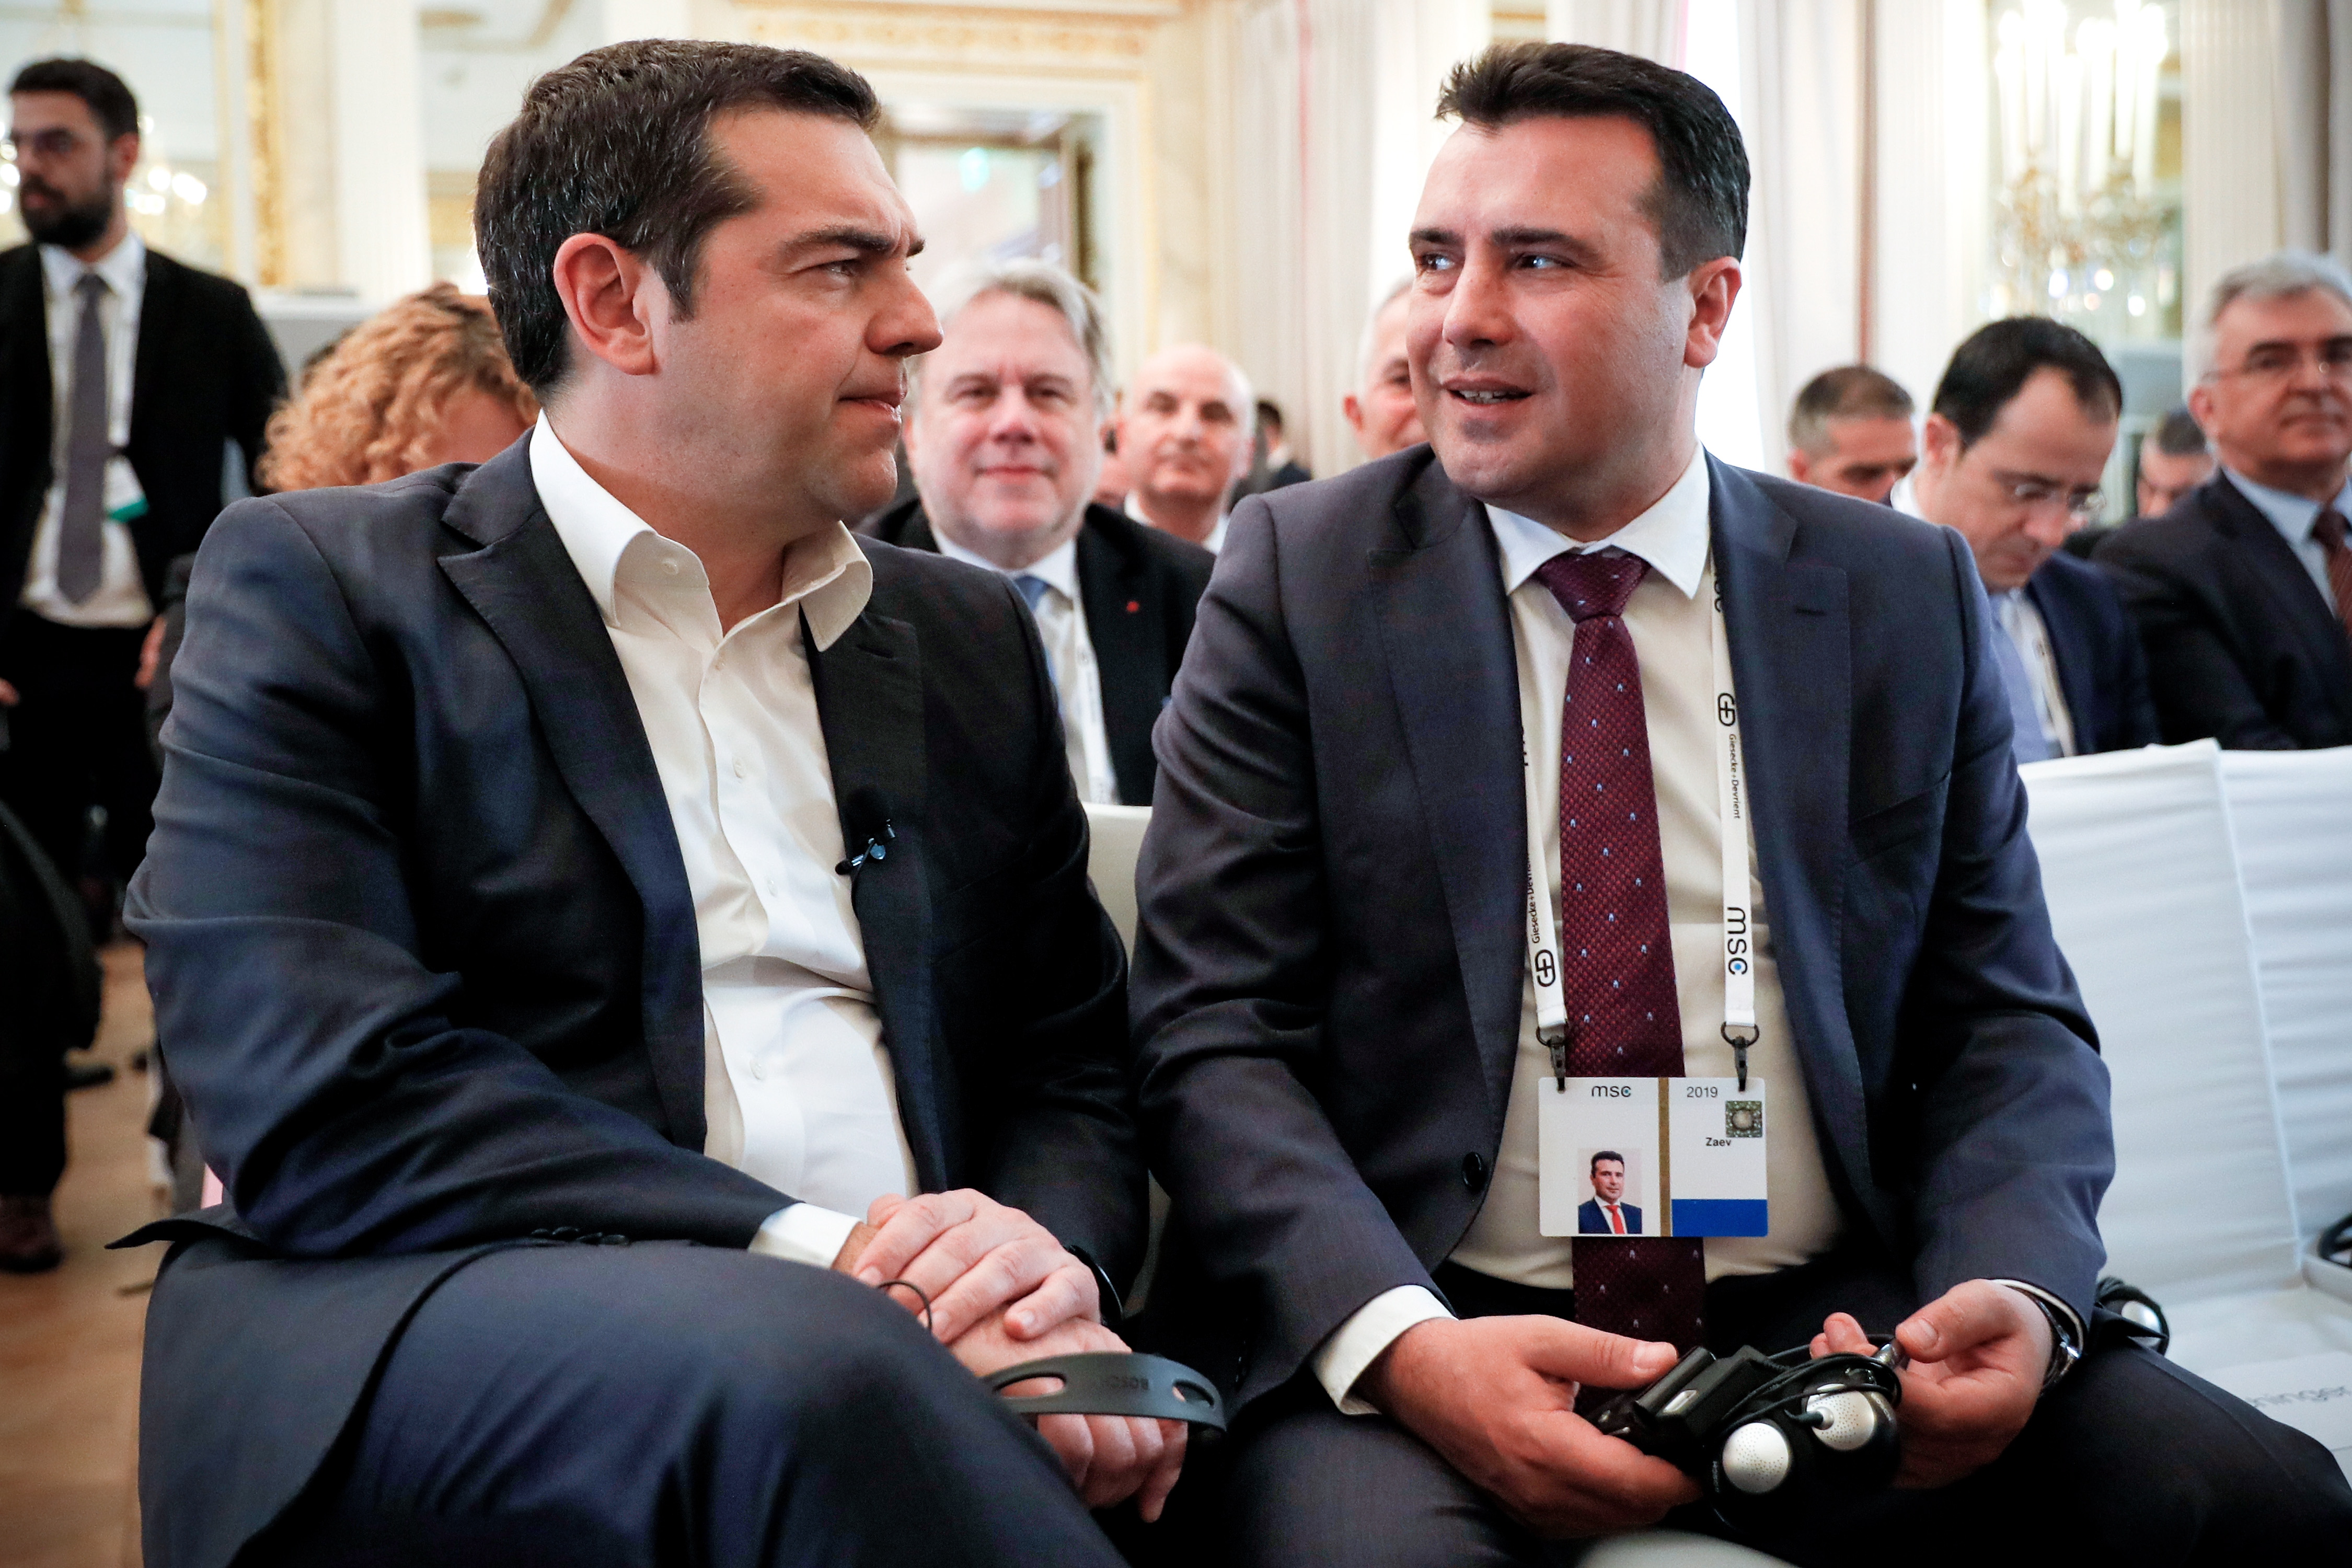 epa07374649 Greek Prime Minister Alexis Tsipras (L) and North Macedonian Prime Minister Zoran Zaev (R) attend a discussion session during the 55th Munich Security Conference (MSC) in Munich, Germany, 16 February 2019. From 15 to 17 February, politicians, various experts and guests from all over the world will discuss global security issues in their annual meeting.  EPA/RONALD WITTEK